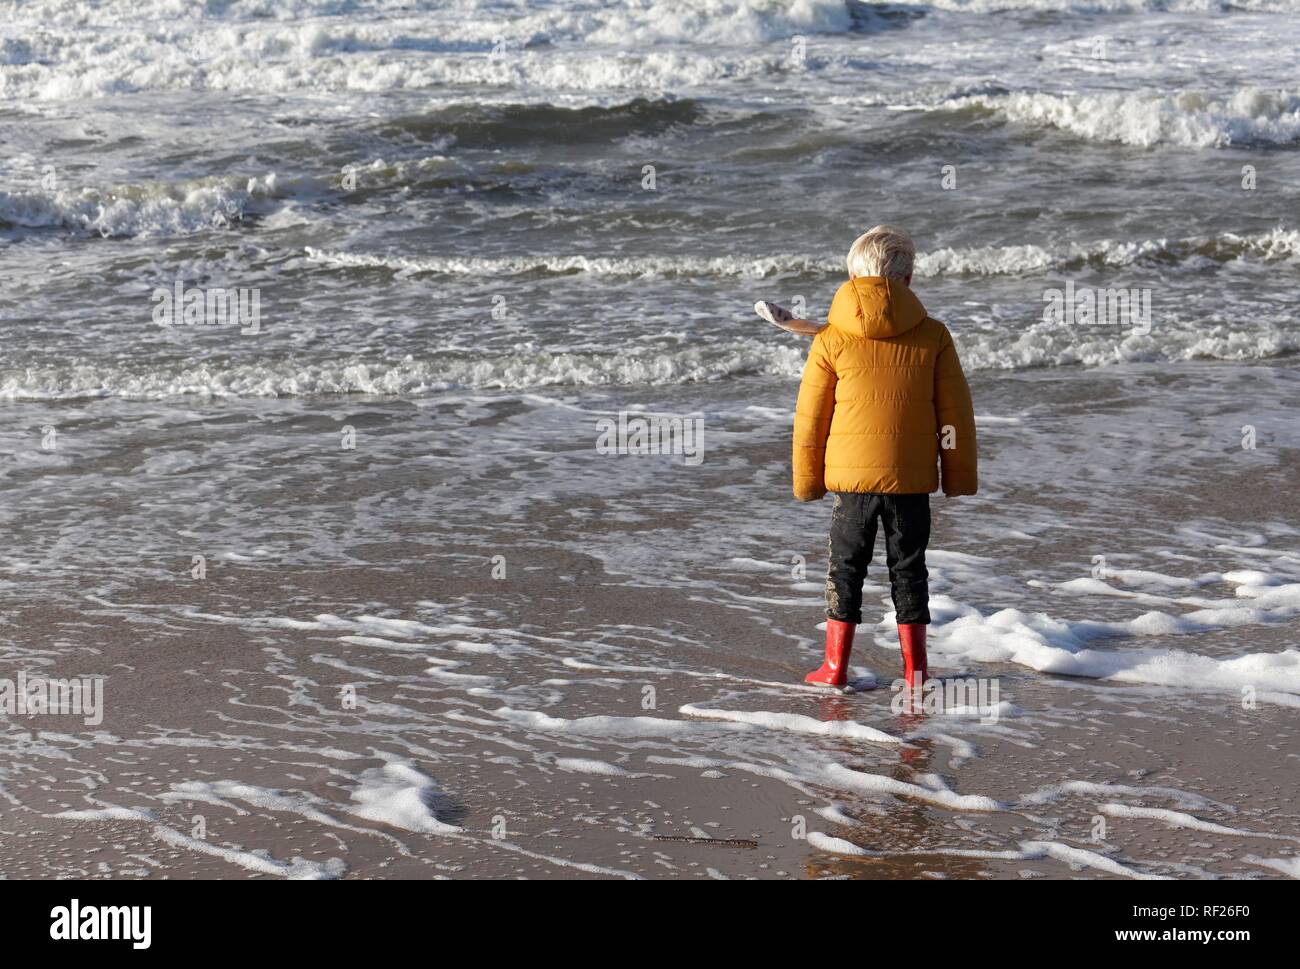 Little boy in winter clothes standing in the surf on the beach, sea view, North Sea, Netherlands Stock Photo